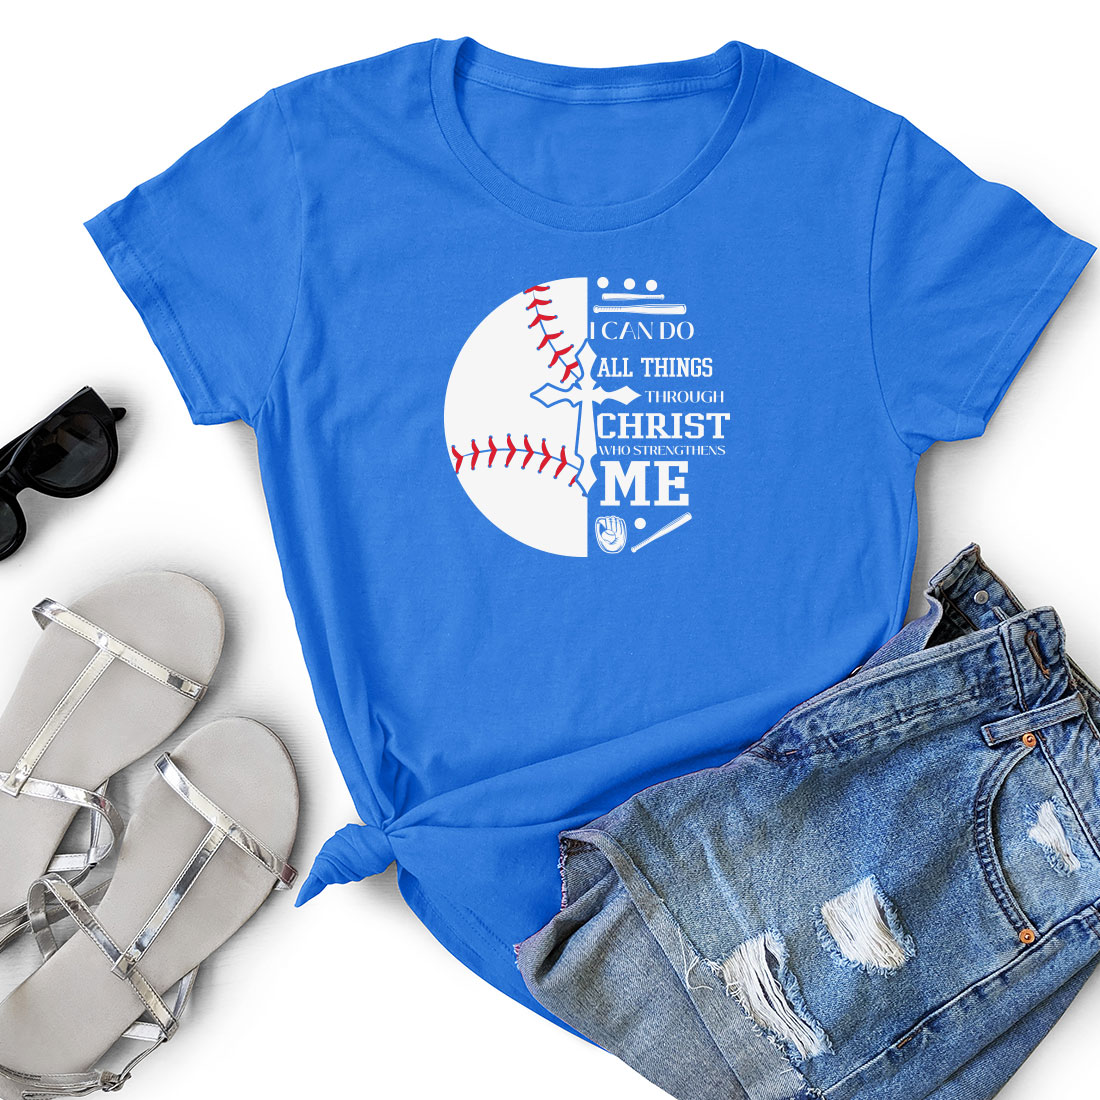 Women's t - shirt with a baseball on it.